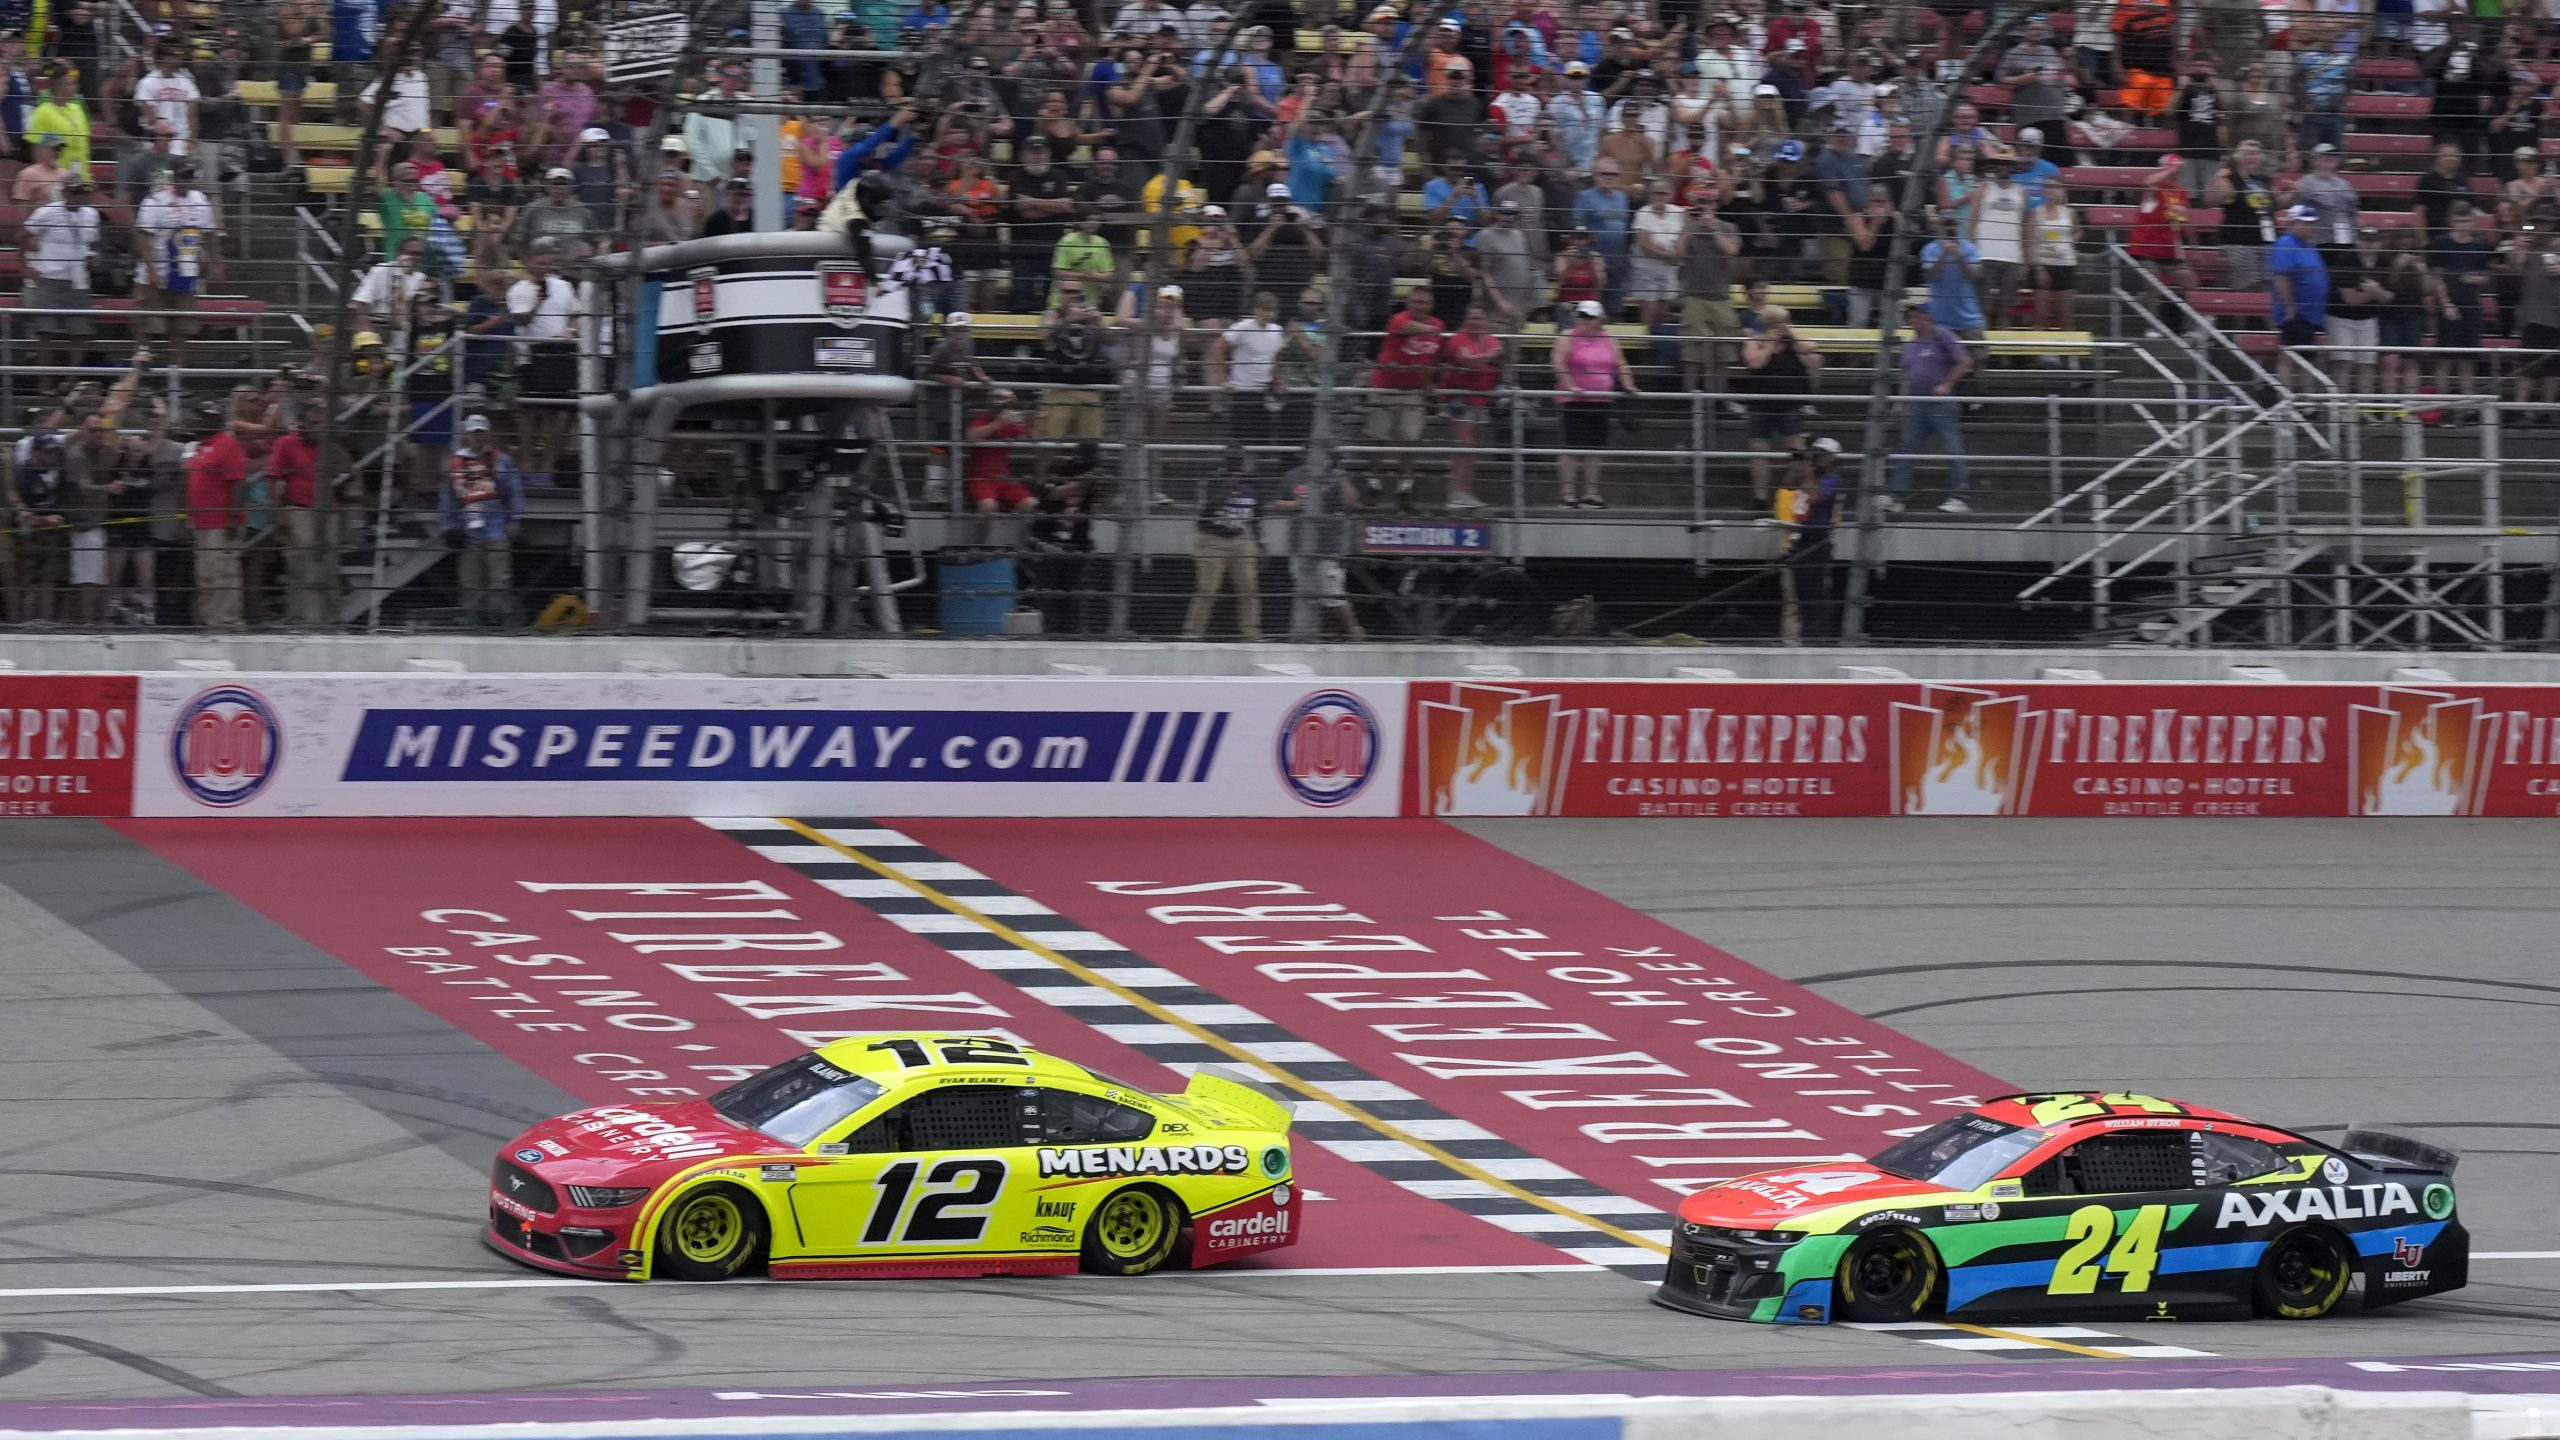 Drivers behind Blaney lament their moves at the finish of Michigan ‘superspeedway’ race